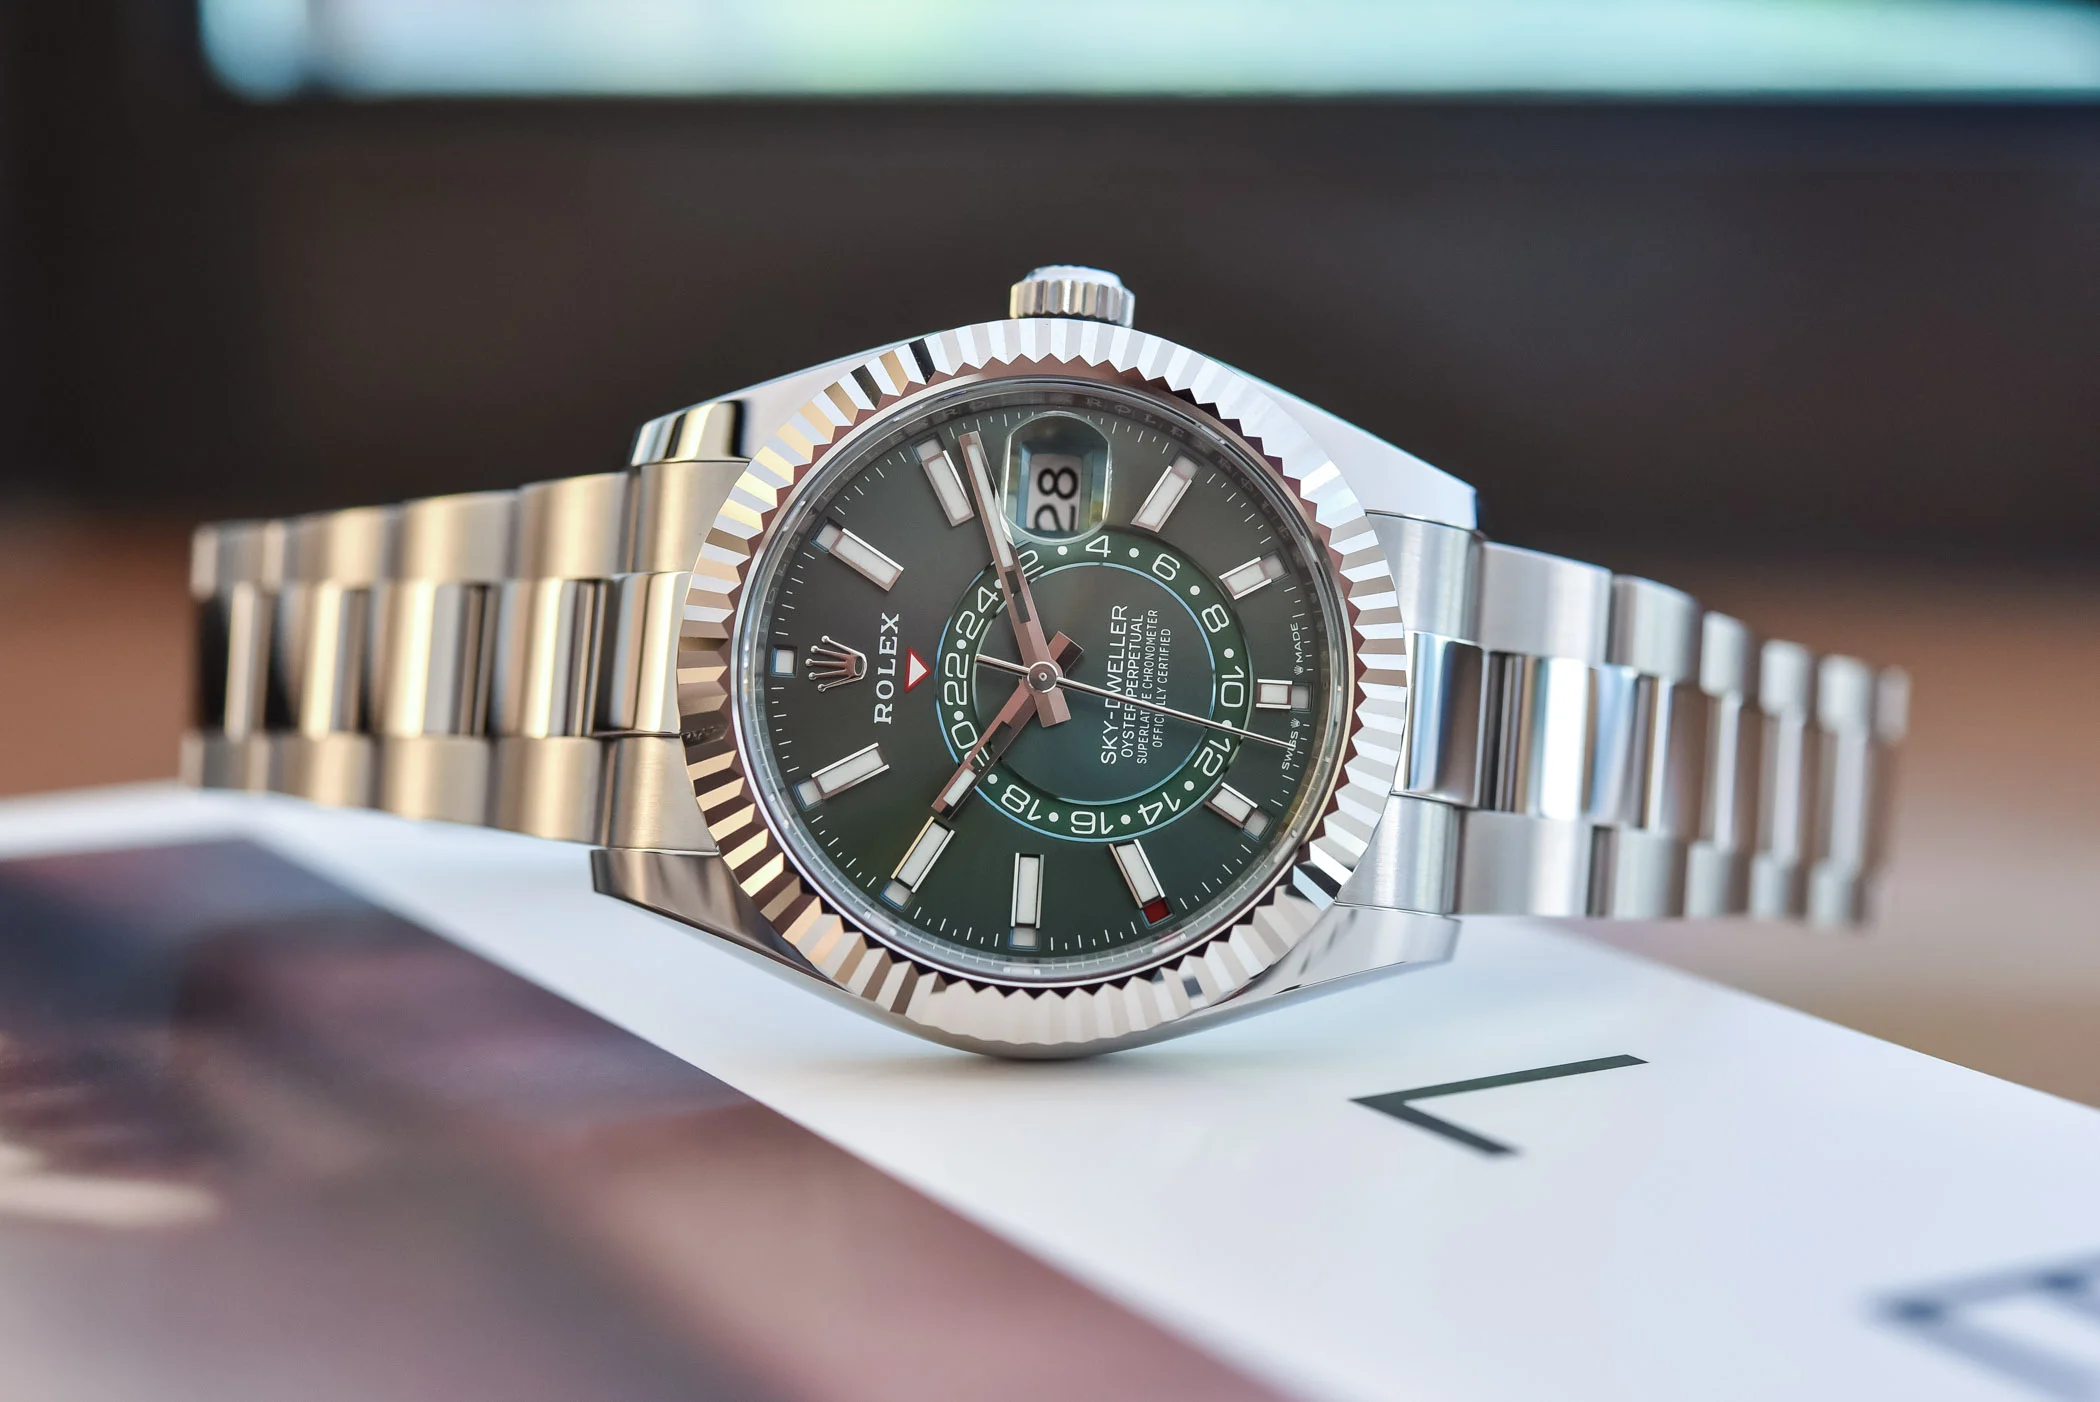 Why is the Rolex Sky-Dweller a distinctive timepiece for global travelers?